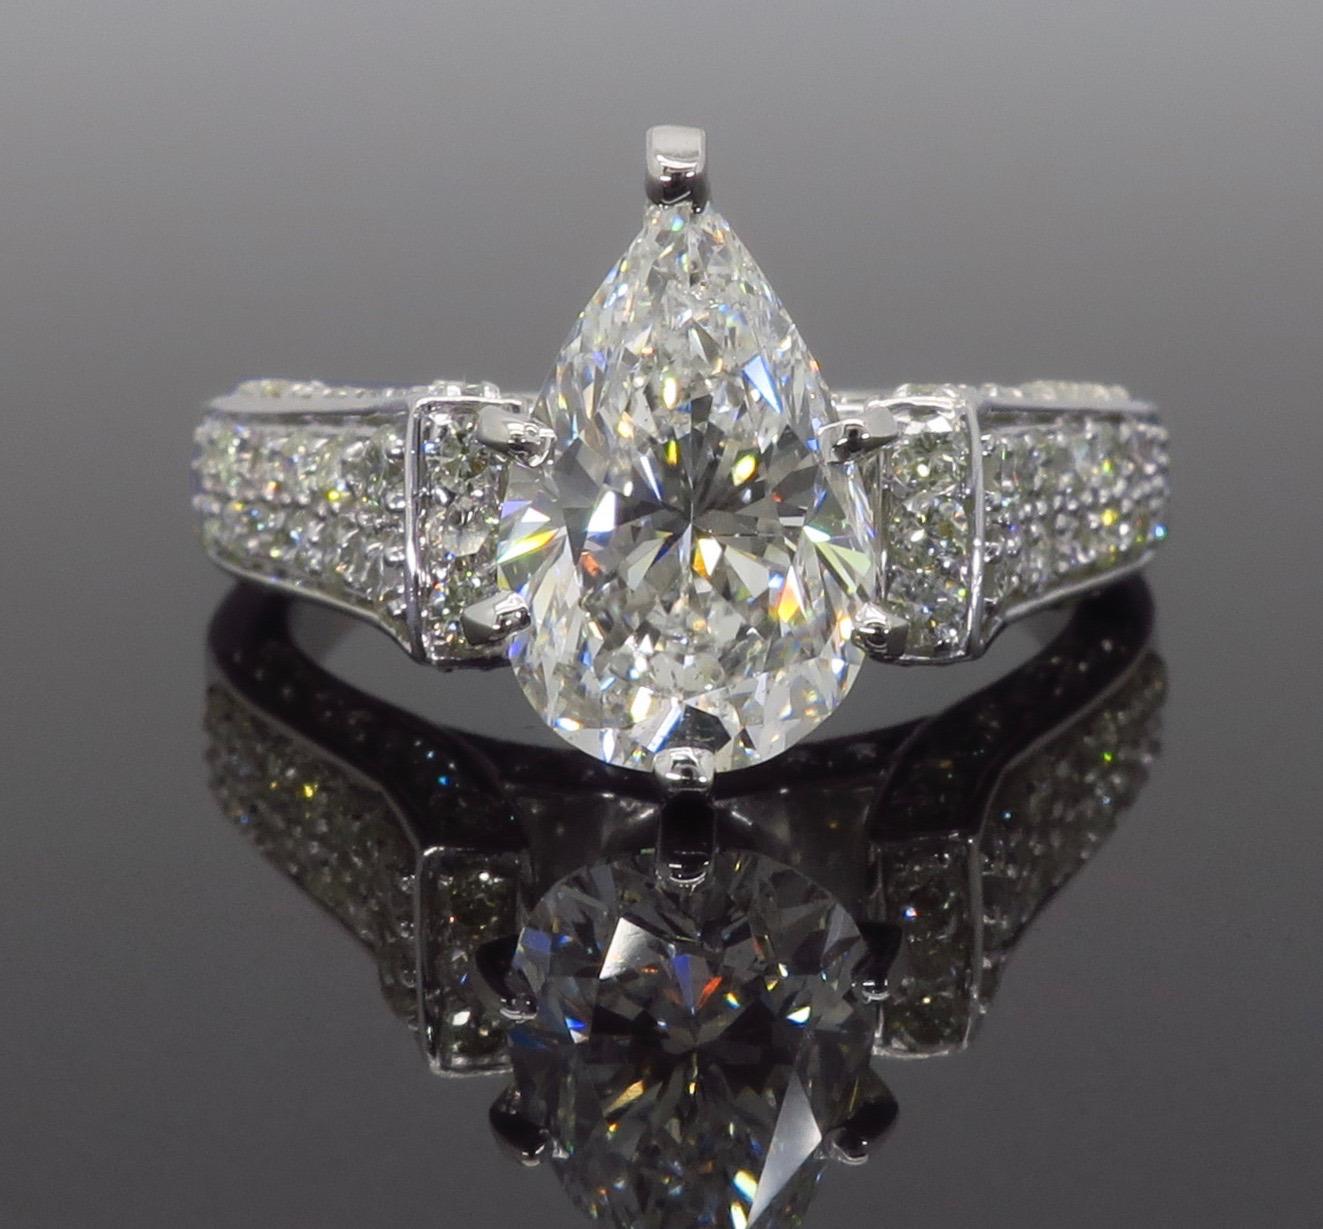 2 carat pear shaped engagement ring